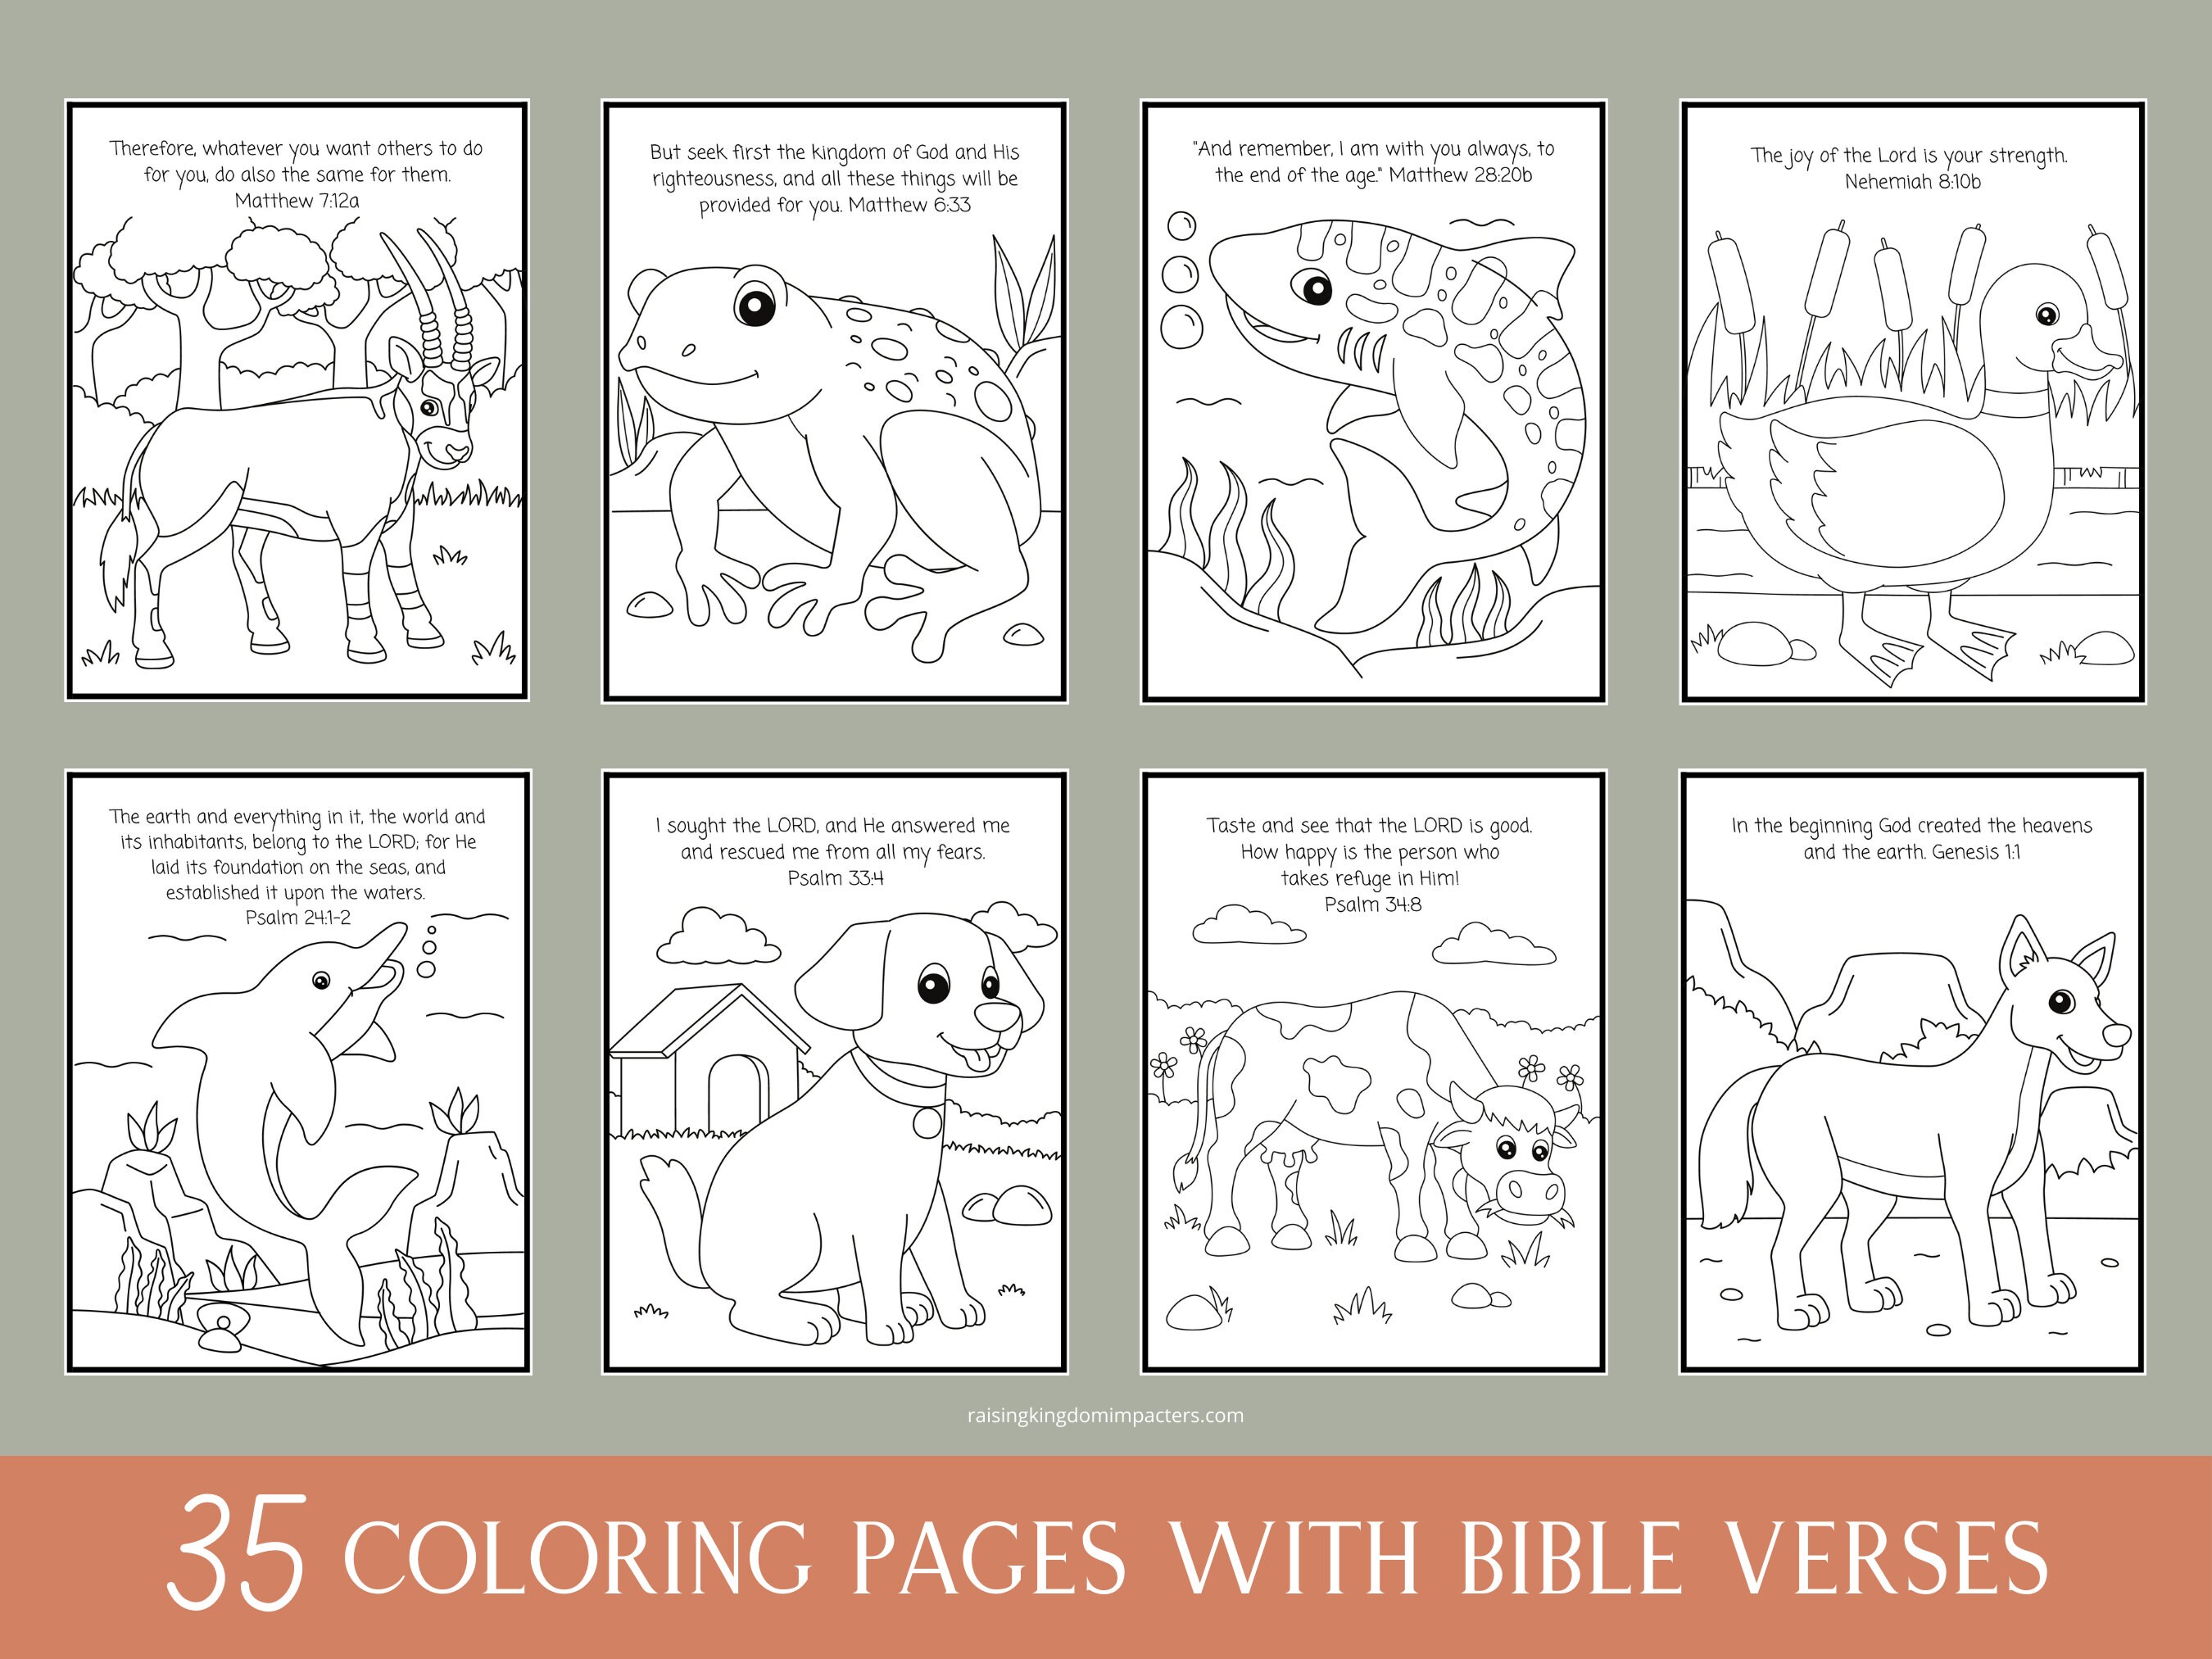 Bible verse coloring pages animal coloring pages kids coloring pages printable coloring pages bible verses coloring sheets instant download